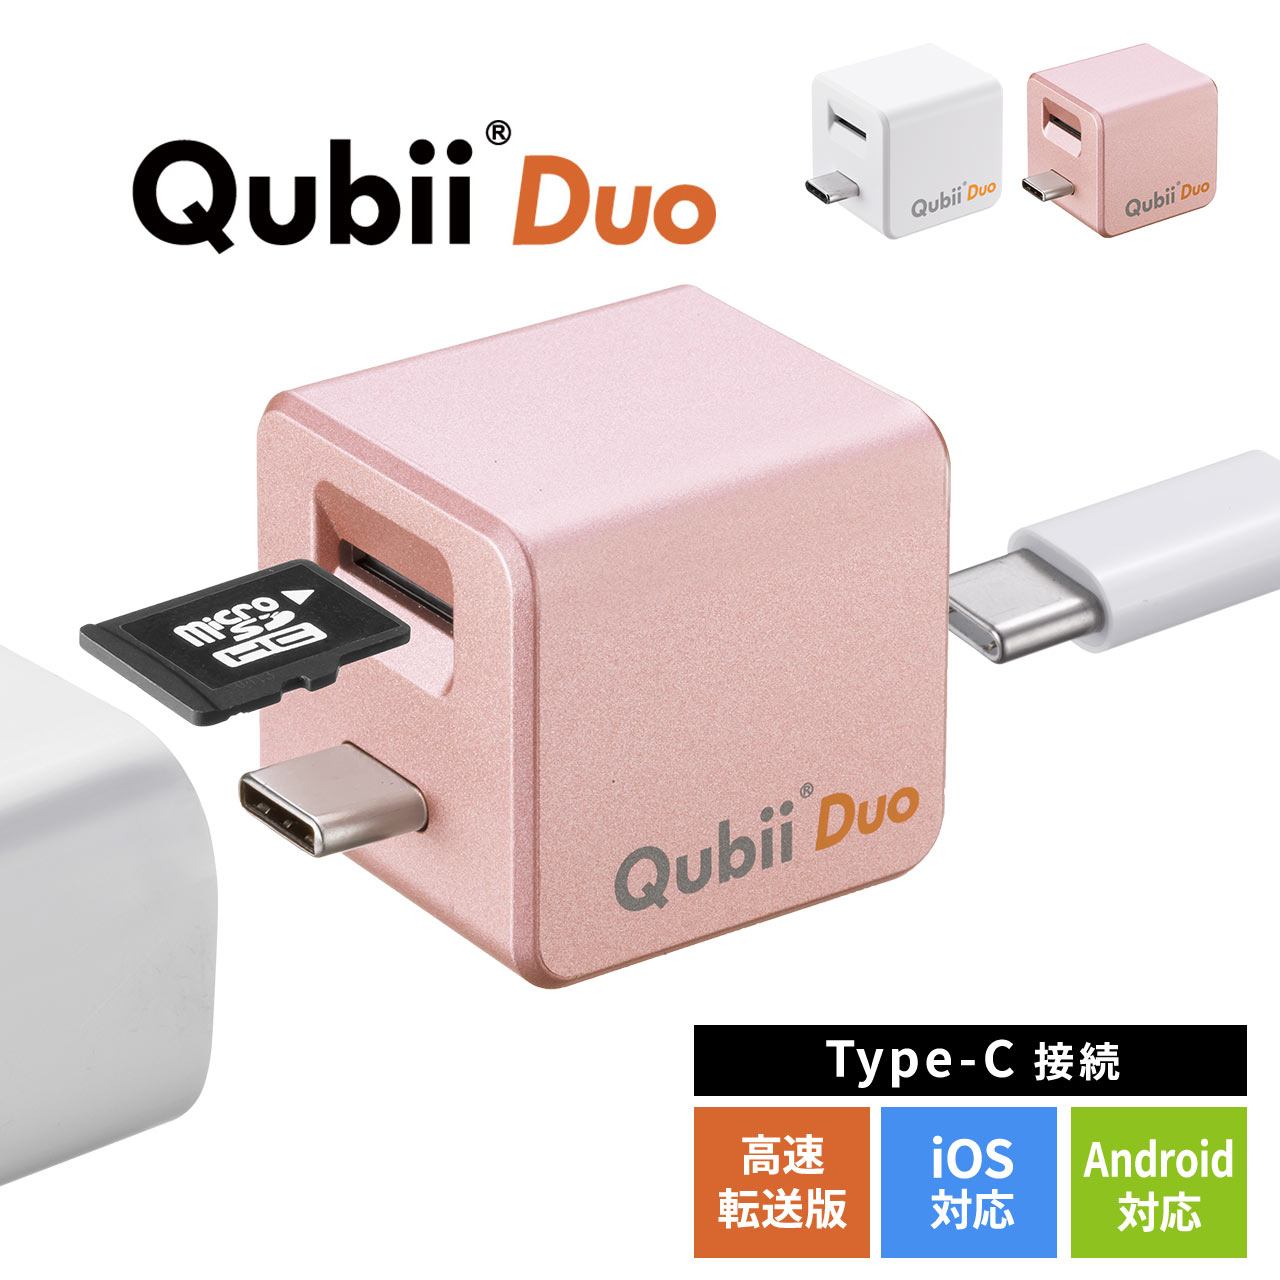 iPhone バックアップ 自動 Qubii Duo Type-C Android カードリーダー